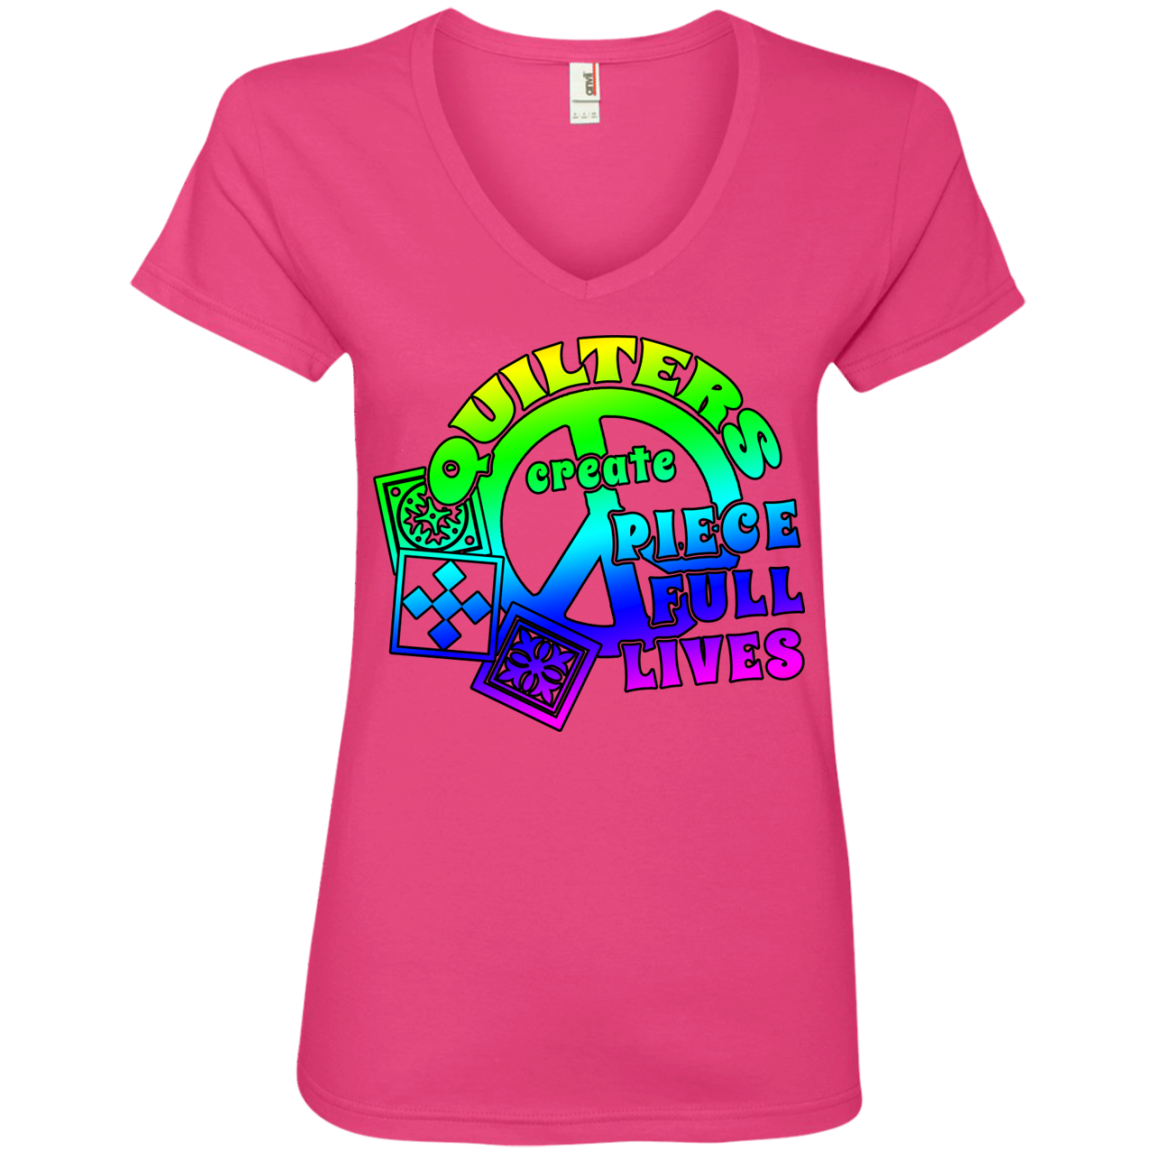 Quilters Create Piece Full Lives Ladies V-neck Tee - Crafter4Life - 4